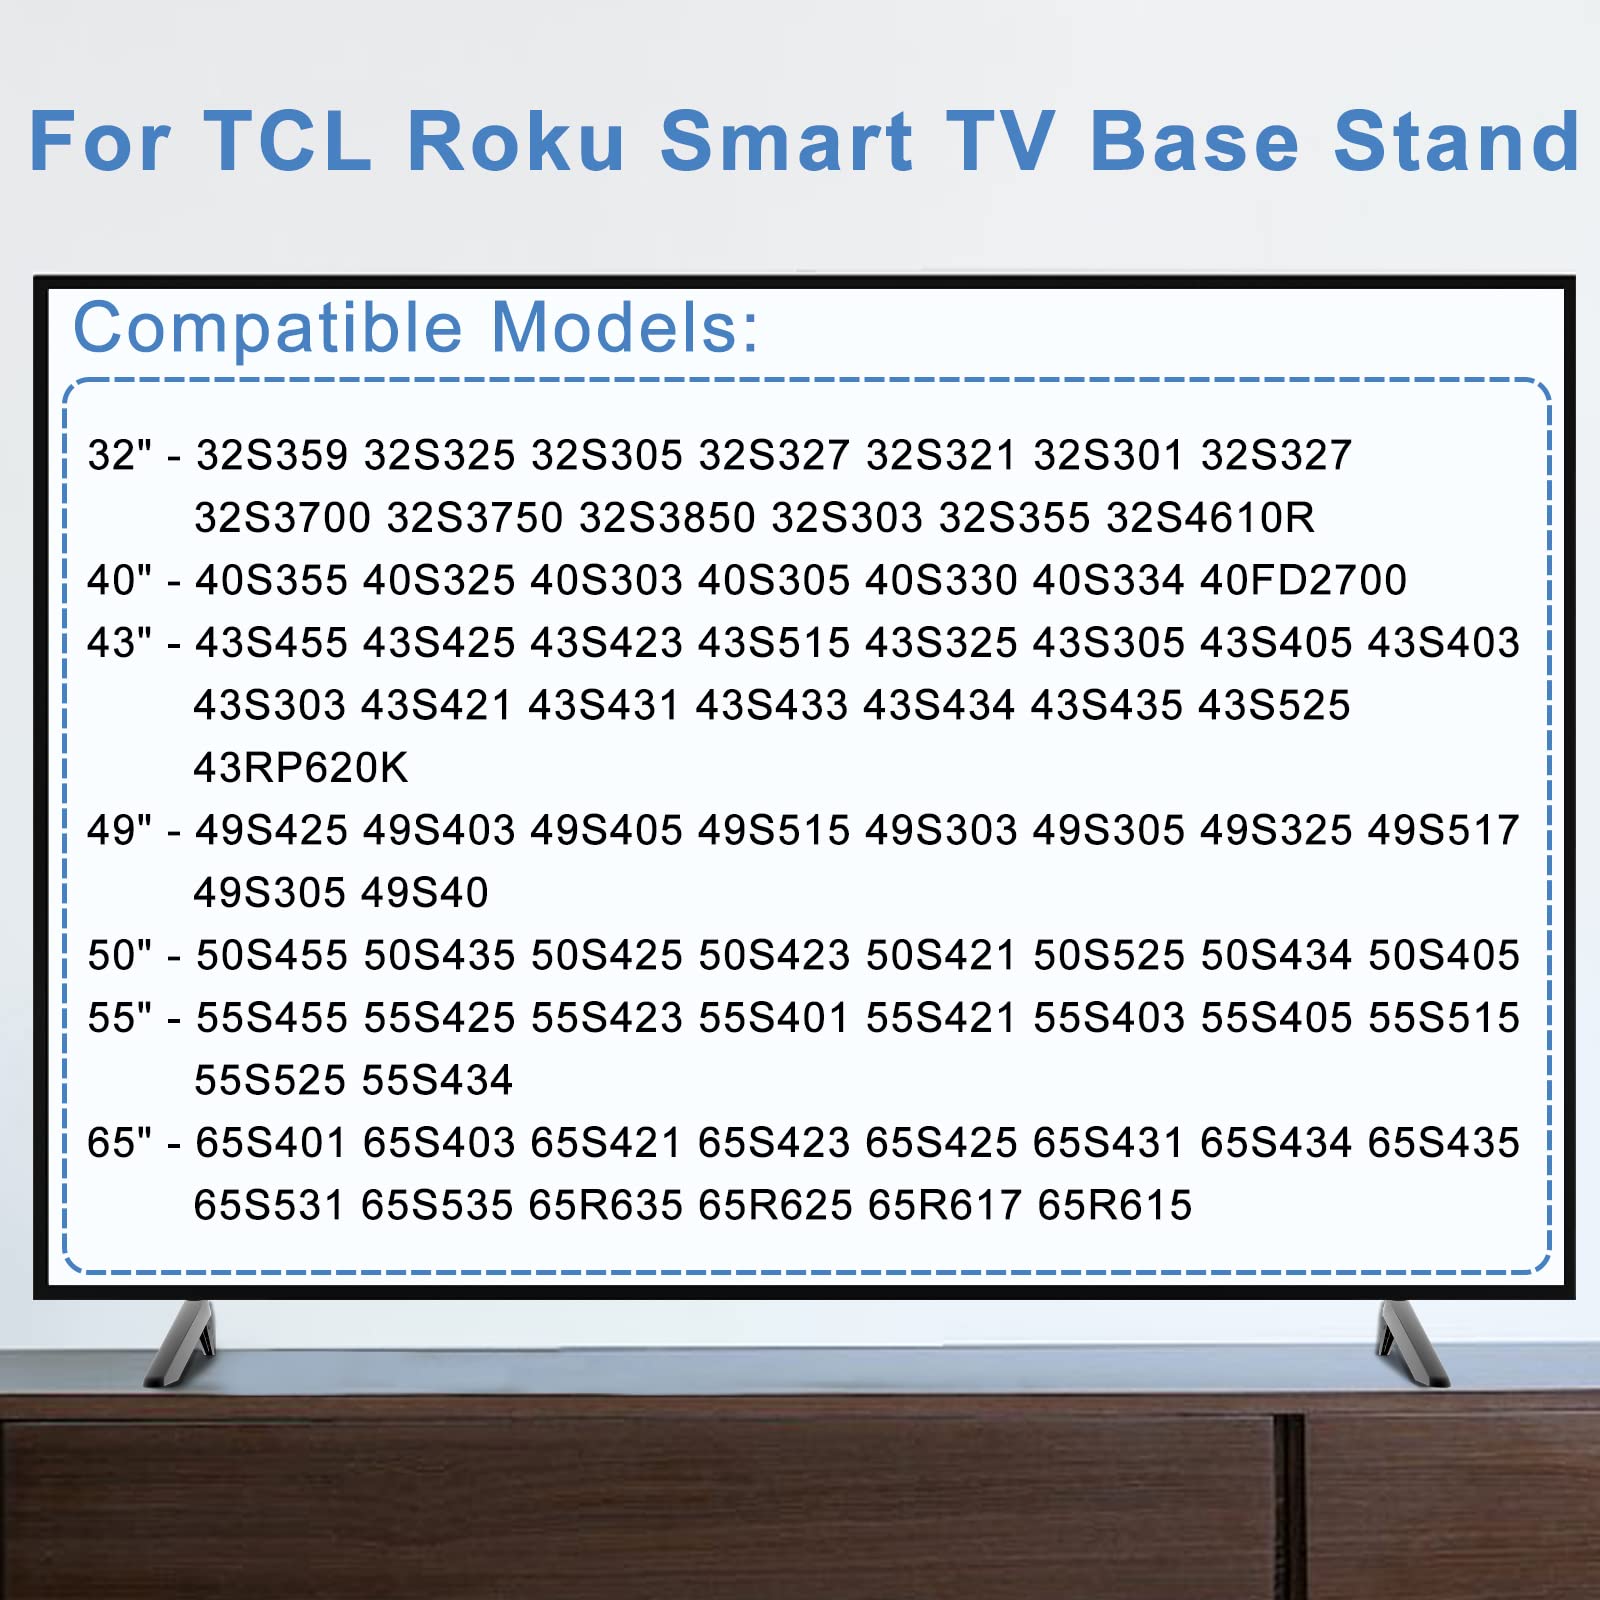 TV Base Stand for TCL Roku Smart TV, TV Legs for TCL TV Stand Legs, for 32 40 43 49 50 55 65 Inch TCL TV Legs - 32S321 32S325 32S305 40S325 43S303 50S425 55S525 65S421 65S425 with Screws